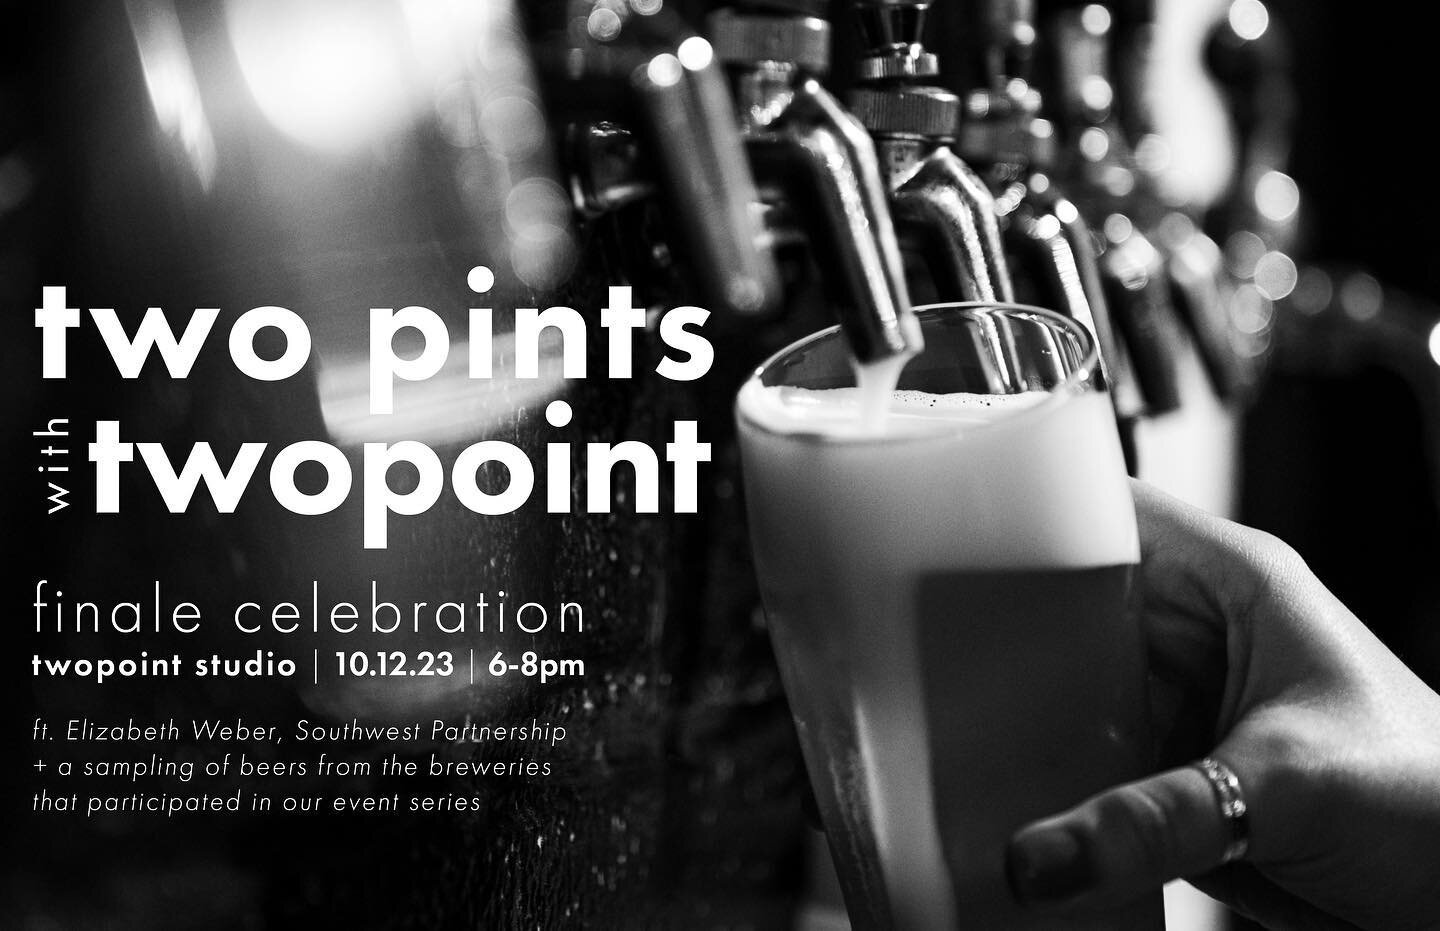 UPDATE: TwoPints with Twopoint FINALE! It&rsquo;s been a year full of incredible events and we can&rsquo;t wait to celebrate over a few pints!
 
Join us for our final event featuring Elizabeth Weber of Southwest Partnership. Stop by our offices Thurs